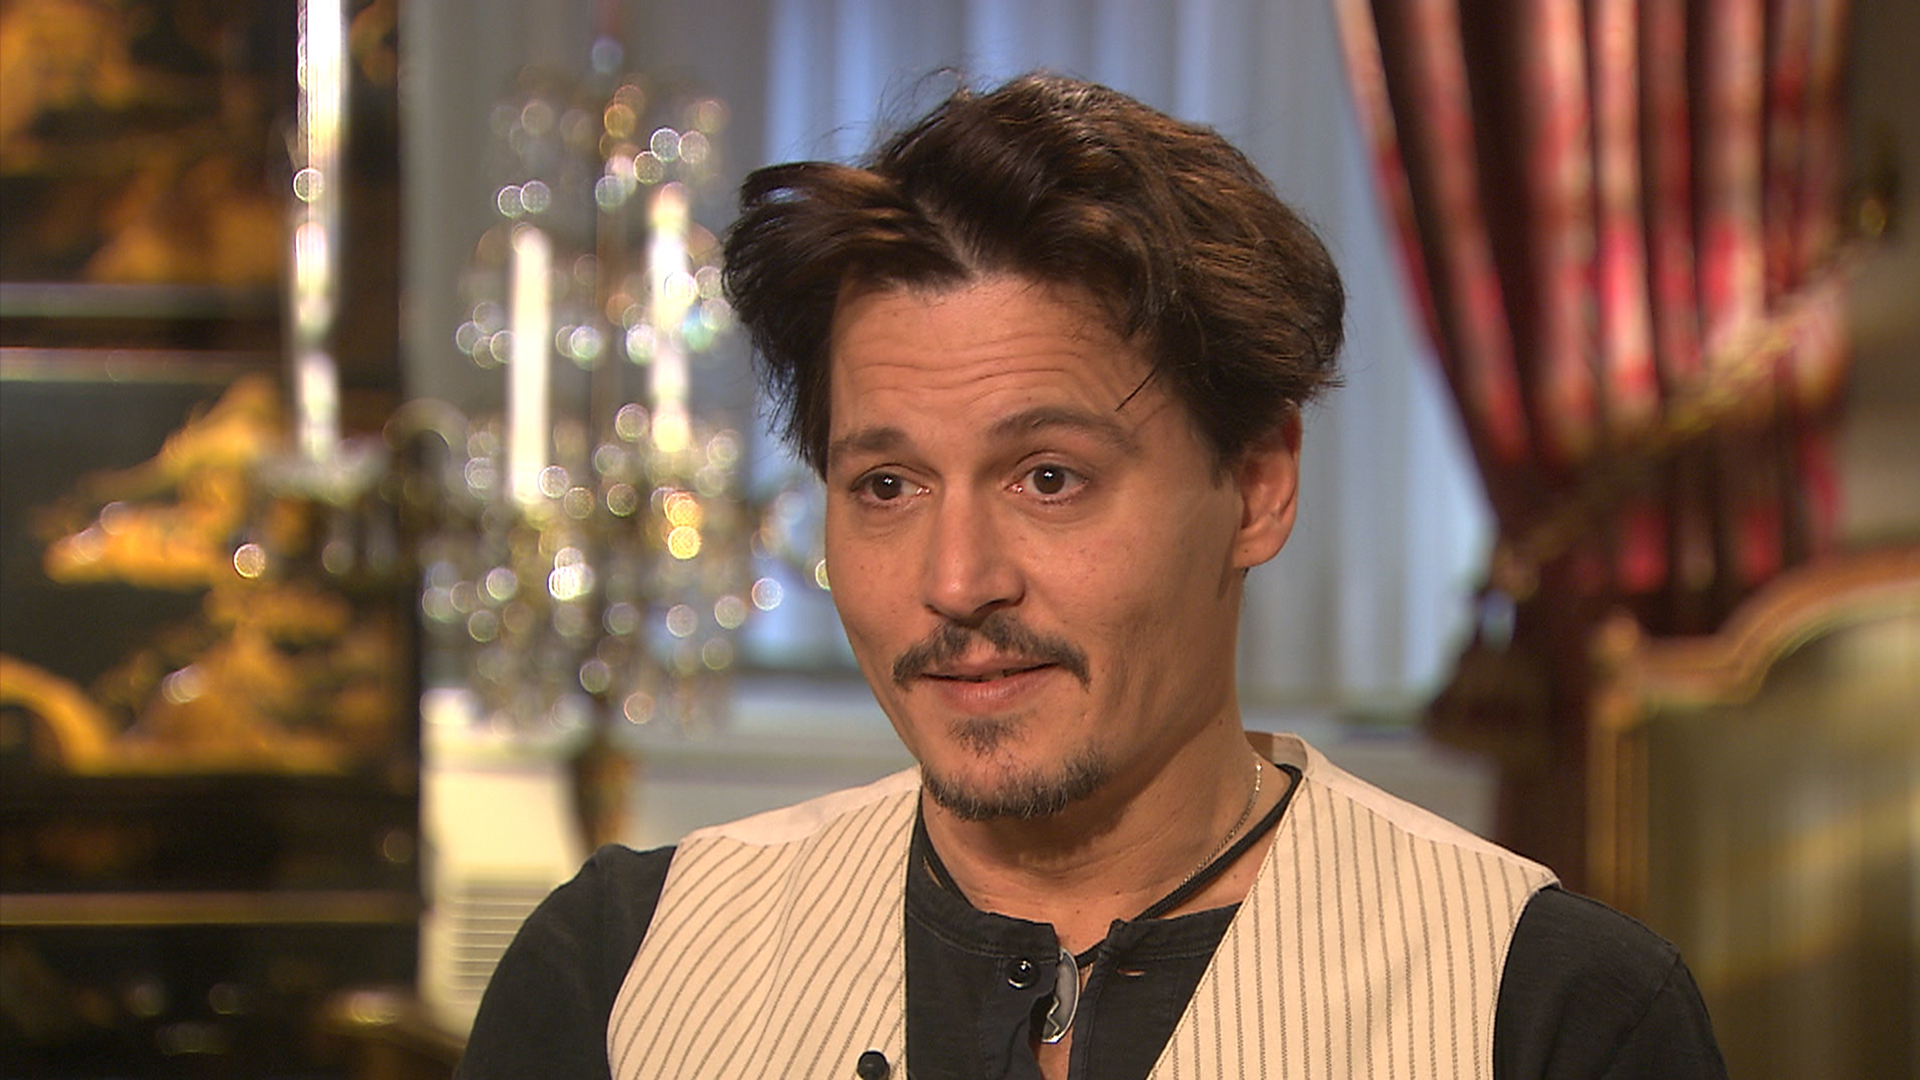 Johnny Depp: I tried to get fired from ’21 Jump Street’ - TODAY.com1920 x 1080